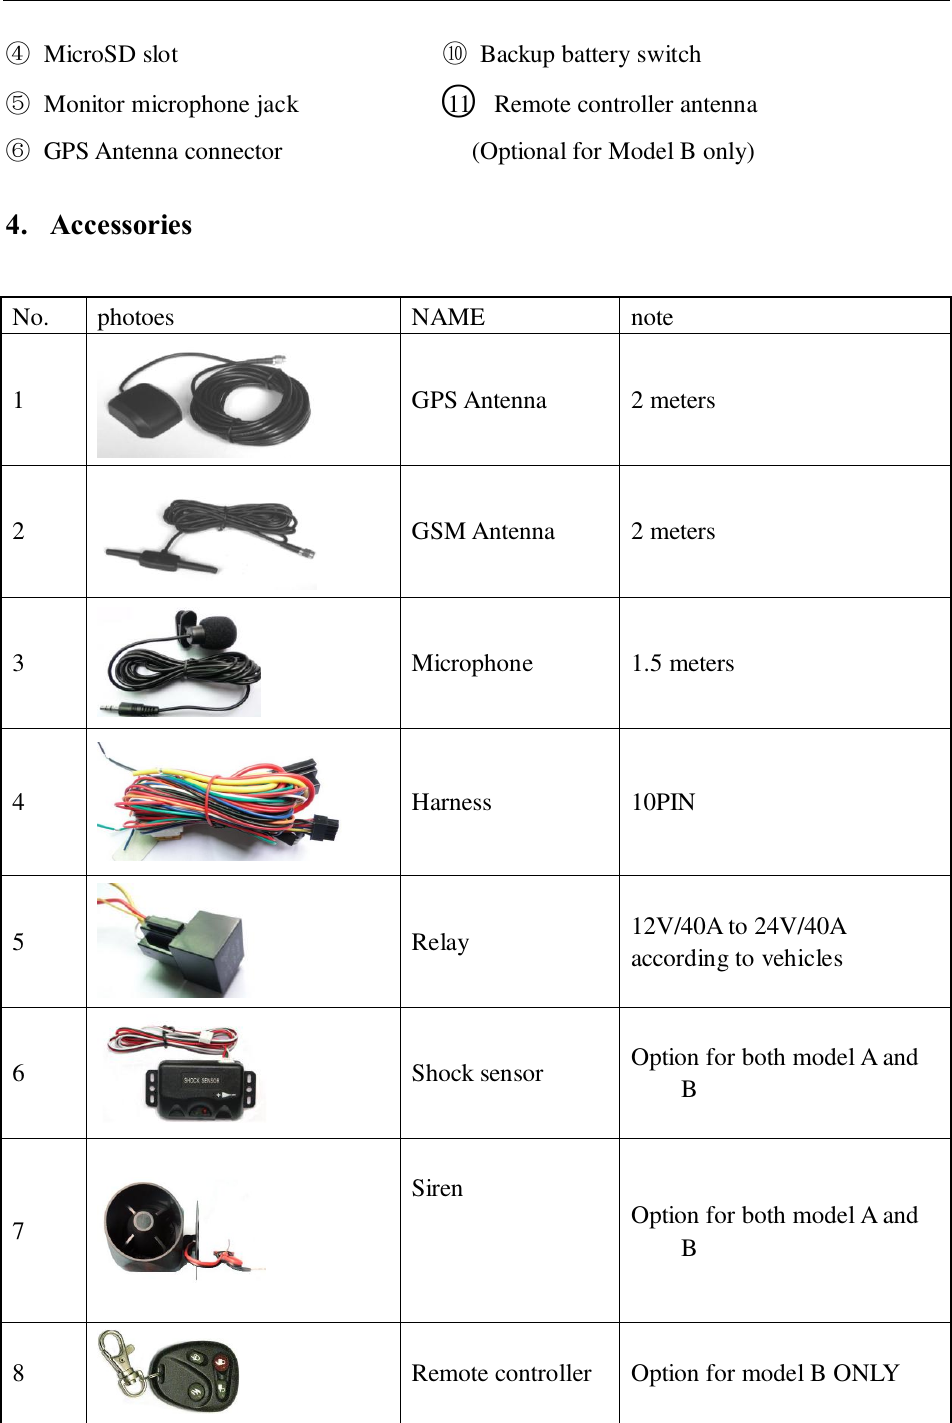   ④ MicroSD slot                     ⑩  Backup battery switch ⑤  Monitor microphone jack             ○11   Remote controller antenna ⑥  GPS Antenna connector                  (Optional for Model B only) 4. Accessories    No. photoes NAME note 1  GPS Antenna 2 meters 2  GSM Antenna 2 meters 3  Microphone 1.5 meters 4  Harness 10PIN 5  Relay 12V/40A to 24V/40A according to vehicles   6  Shock sensor Option for both model A and B   7   Siren Option for both model A and B 8  Remote controller Option for model B ONLY 